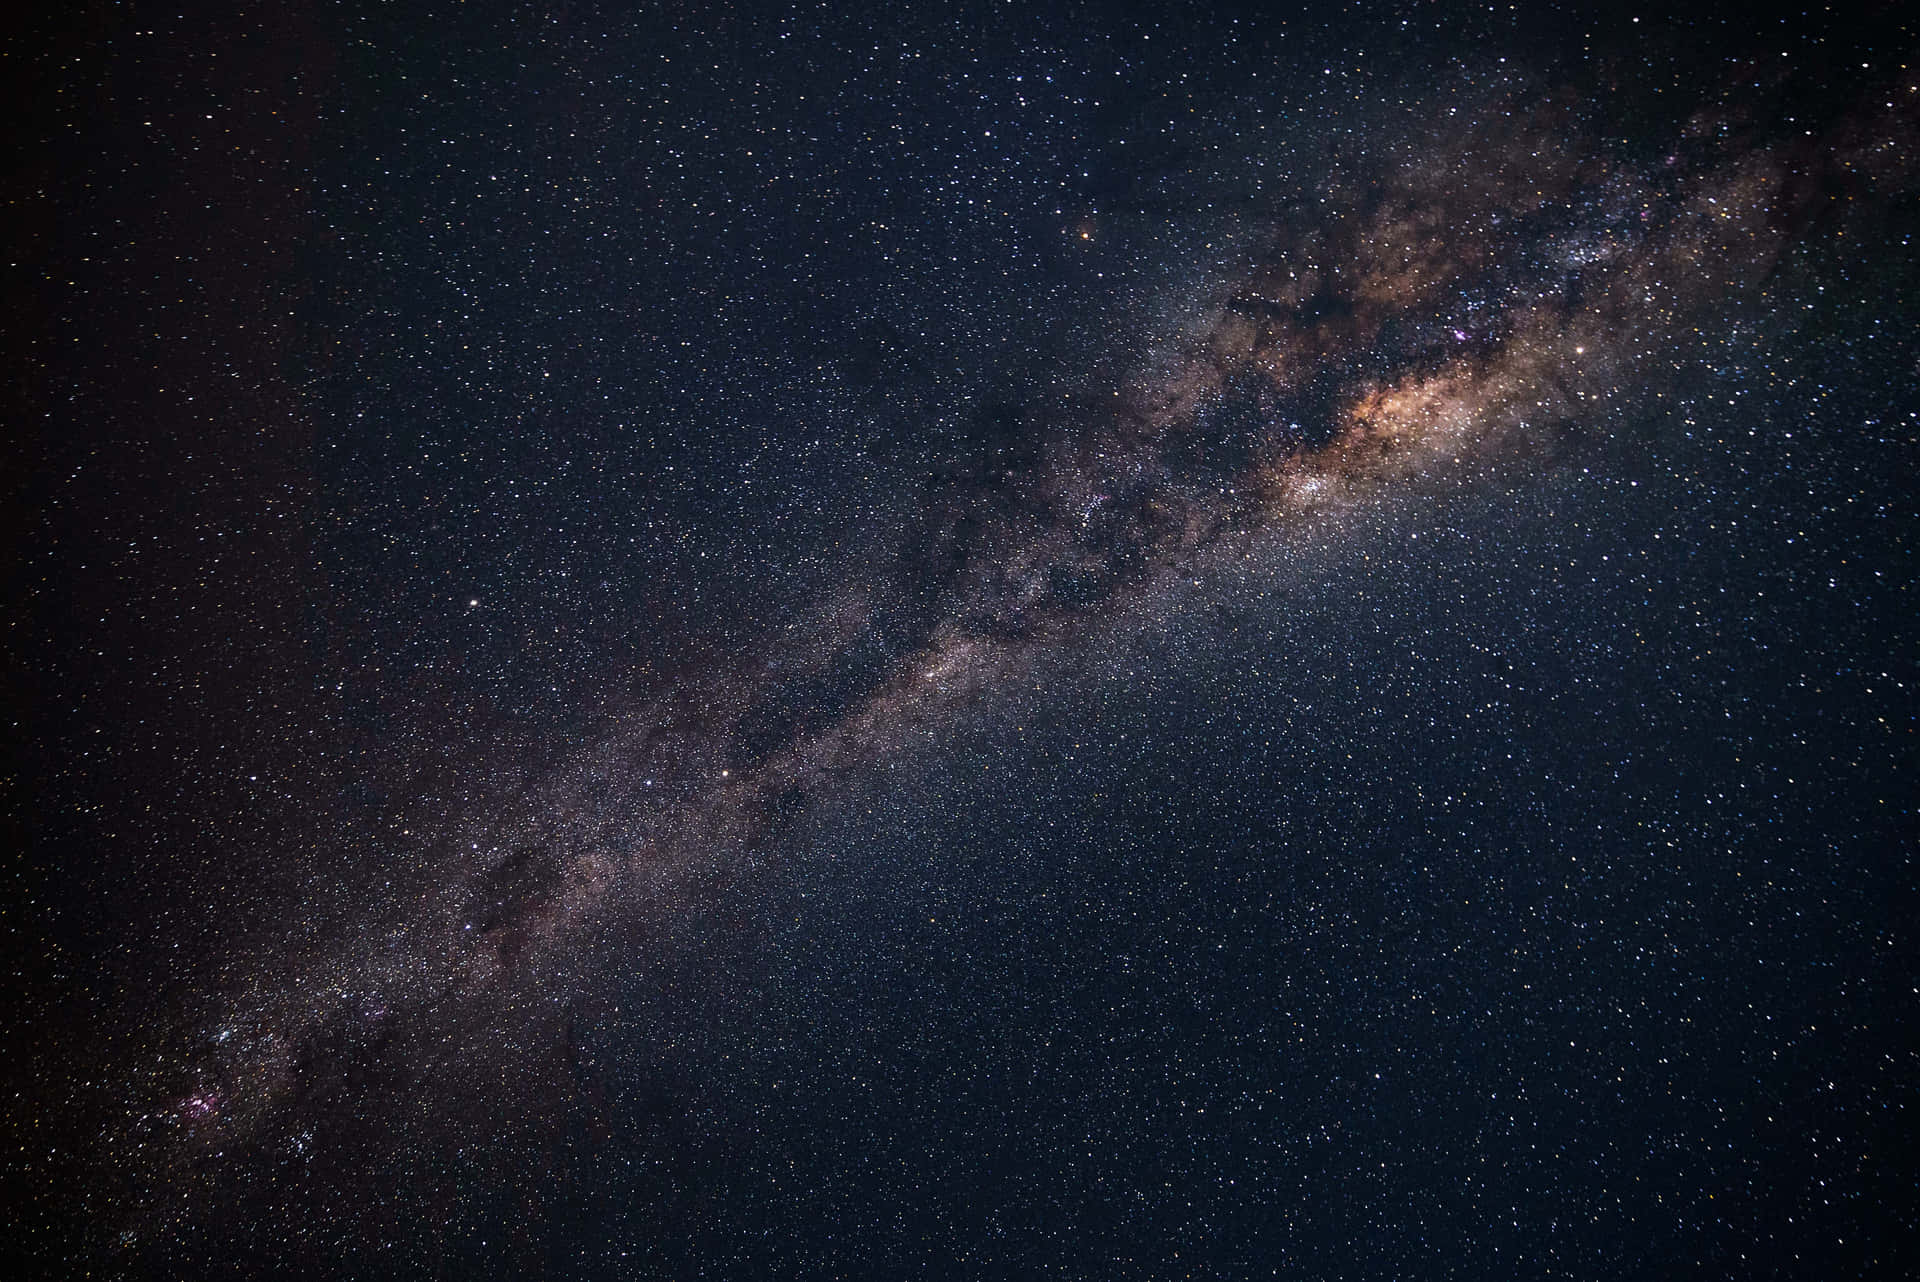 Find beauty among the stars and explore the unknown with Beautiful Space Wallpaper